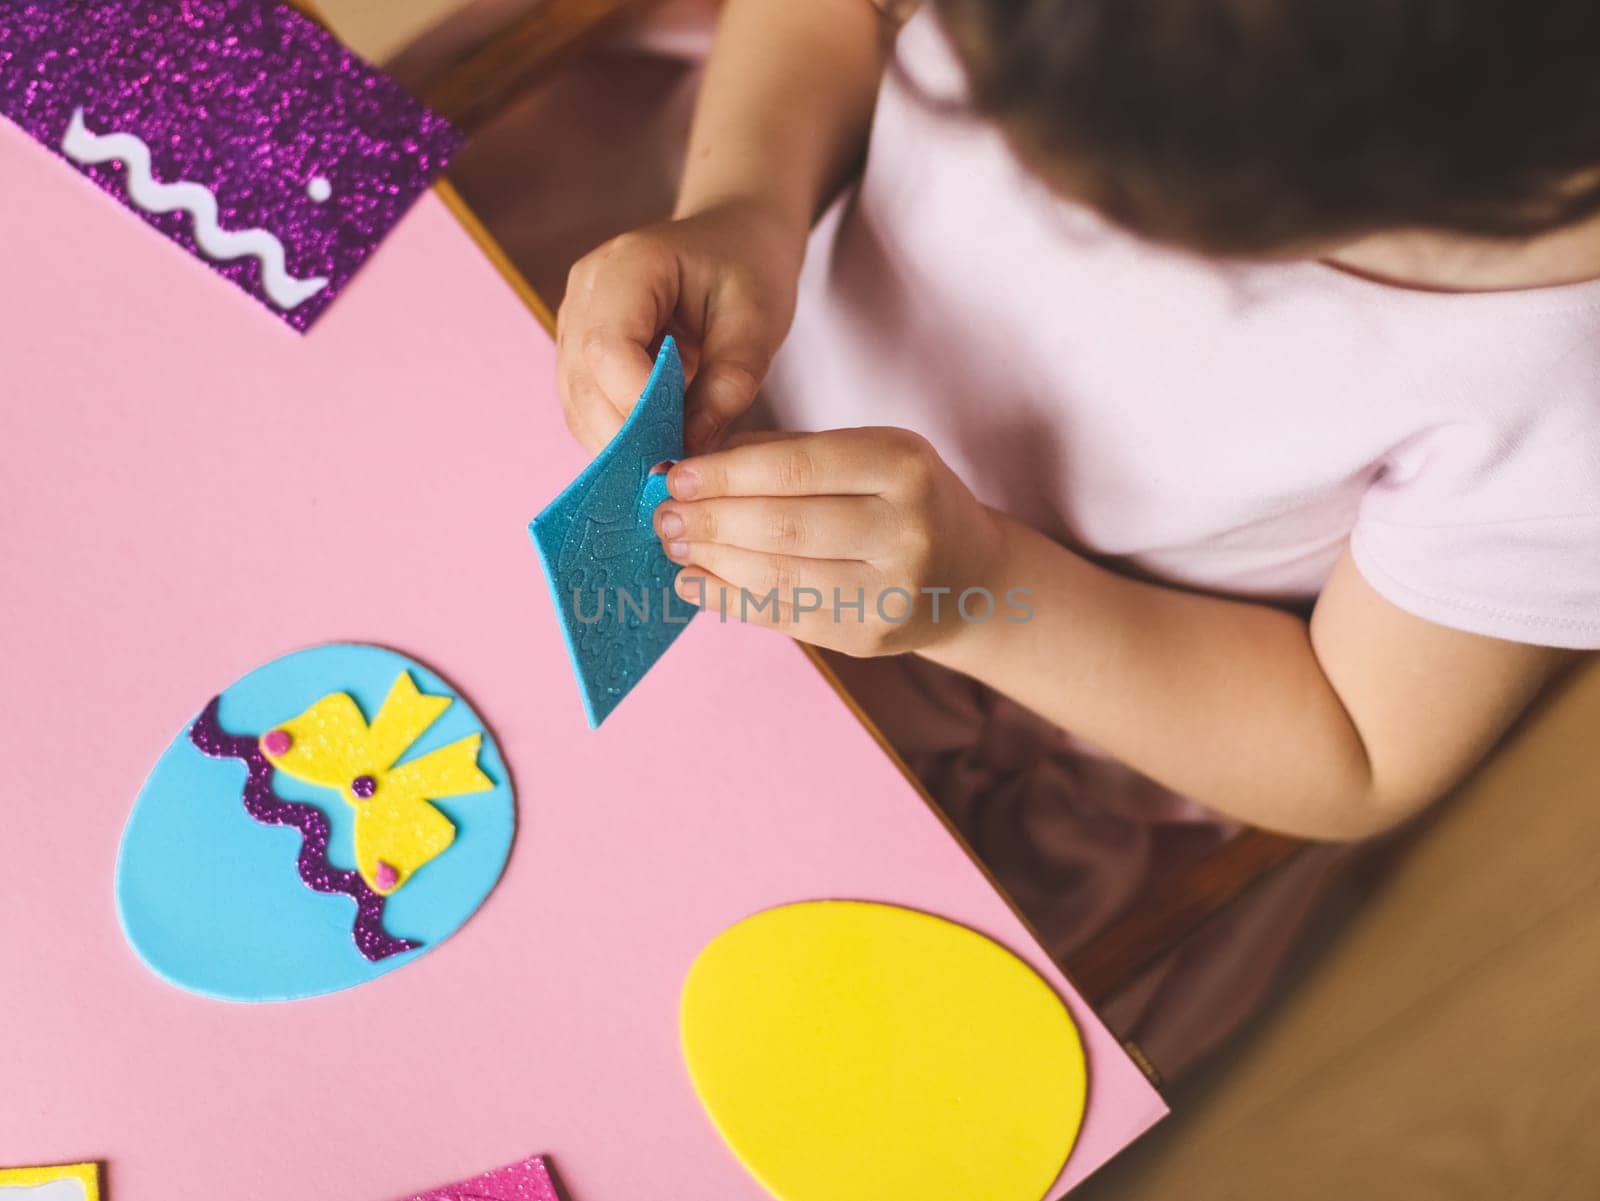 Hands of a little caucasian girl holding a blue sticker and peeling off a hat for felt eggs, sitting at a children's table with a set of handicrafts on a pink background, flat lay close-up.Craft concept,diy,needlework,at home,artisanal,children art,children creative,preparation Easter.